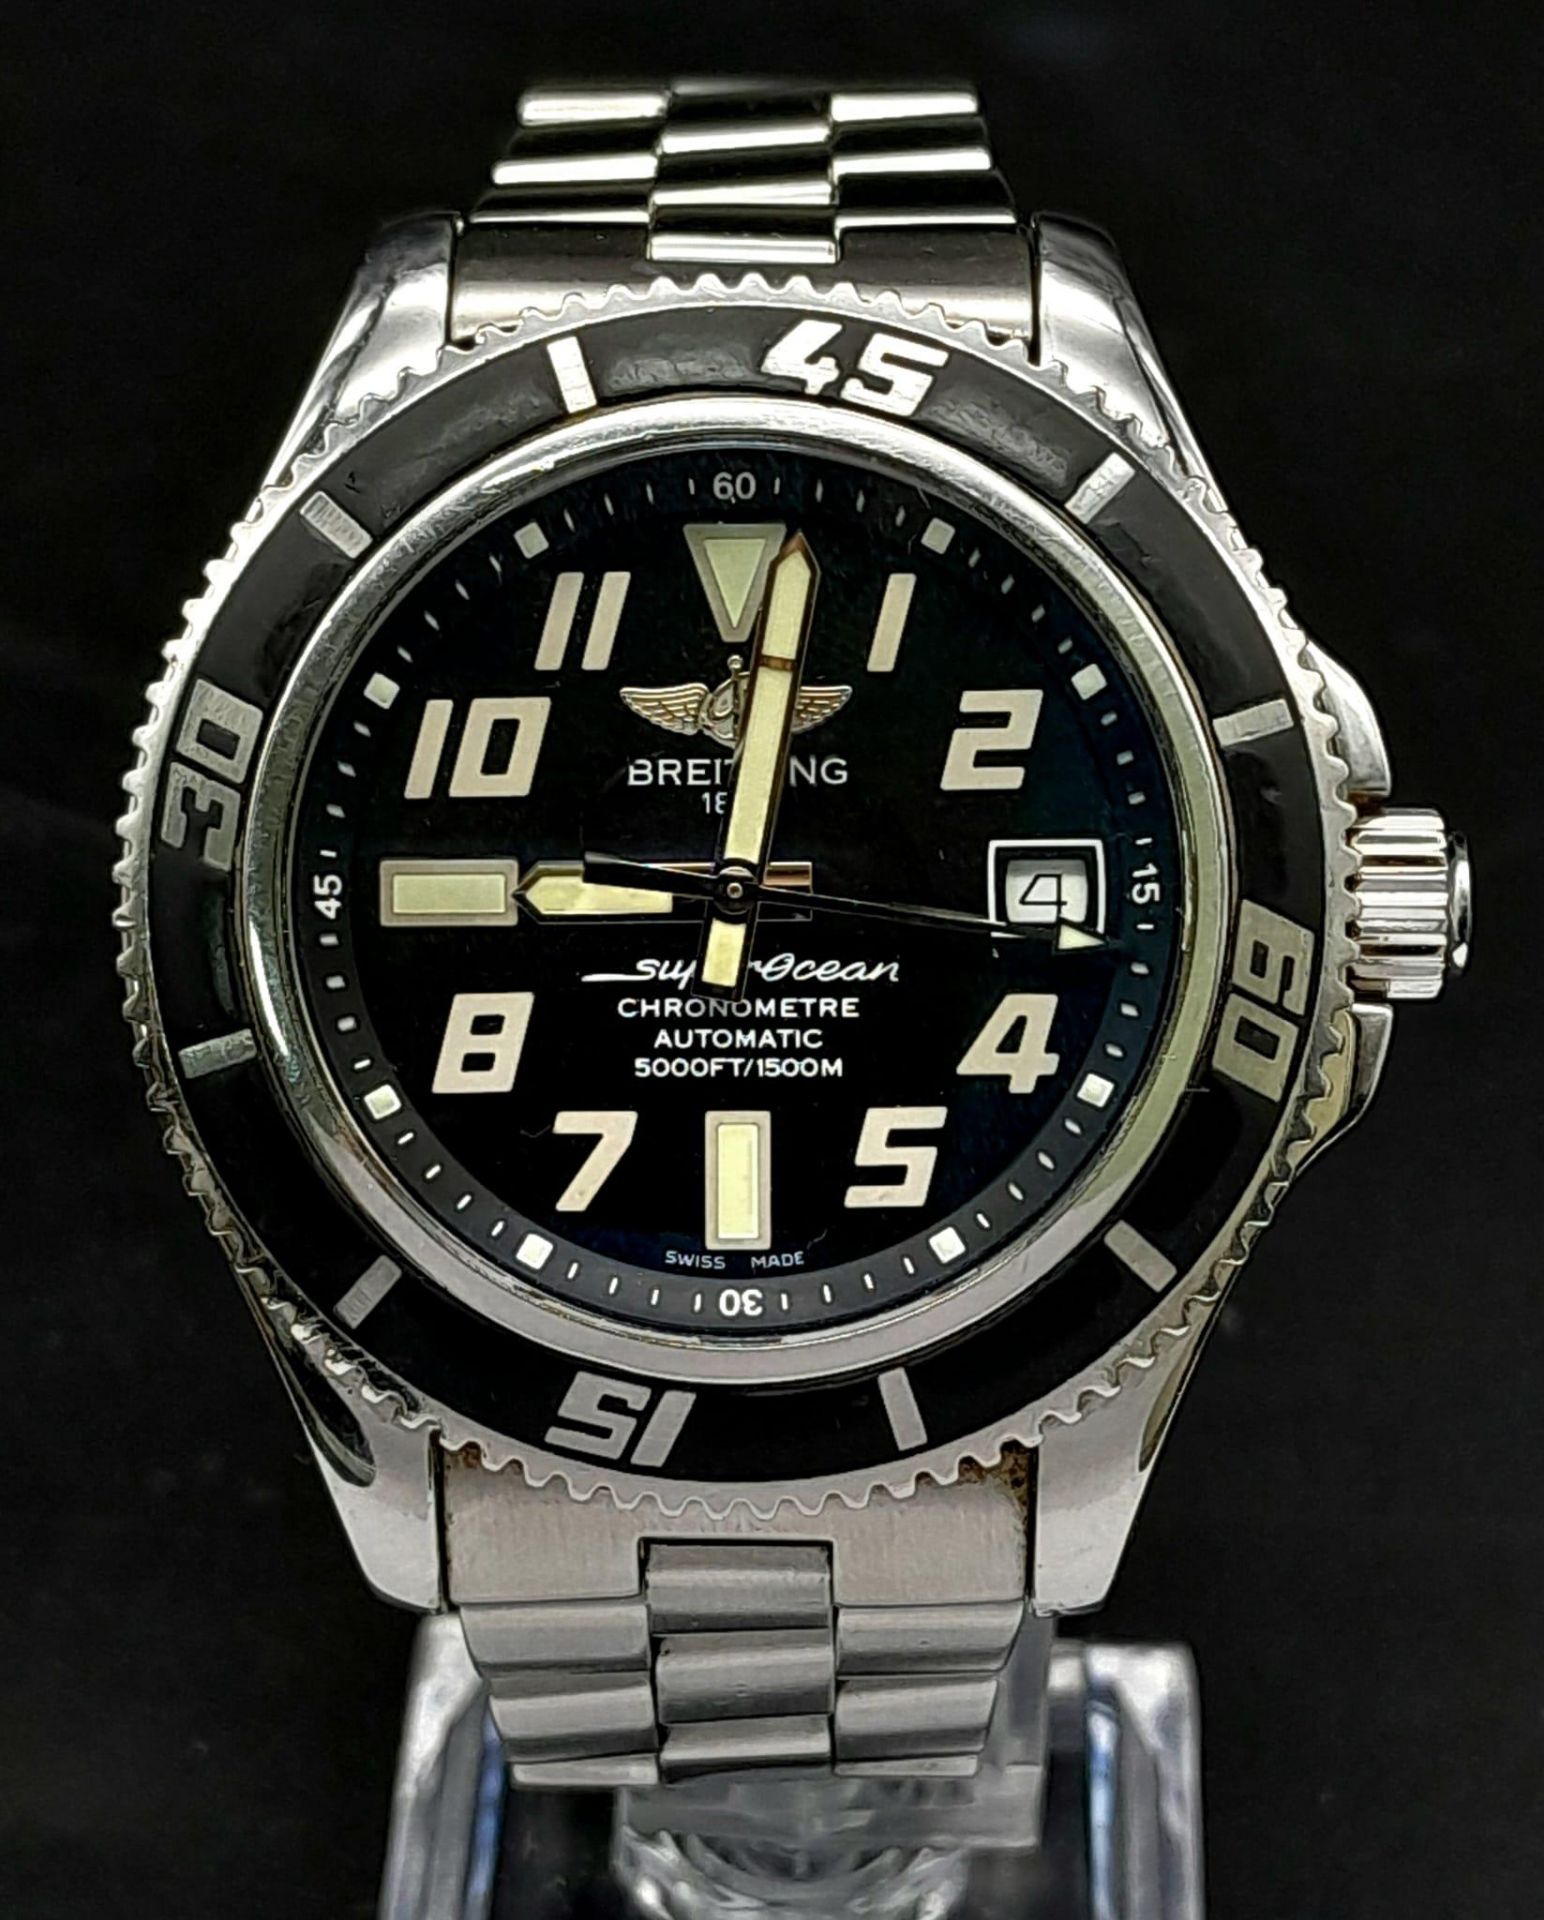 A Breitling SuperOcean Automatic Gents Watch. Stainless steel strap and case - 42mm. Matt black